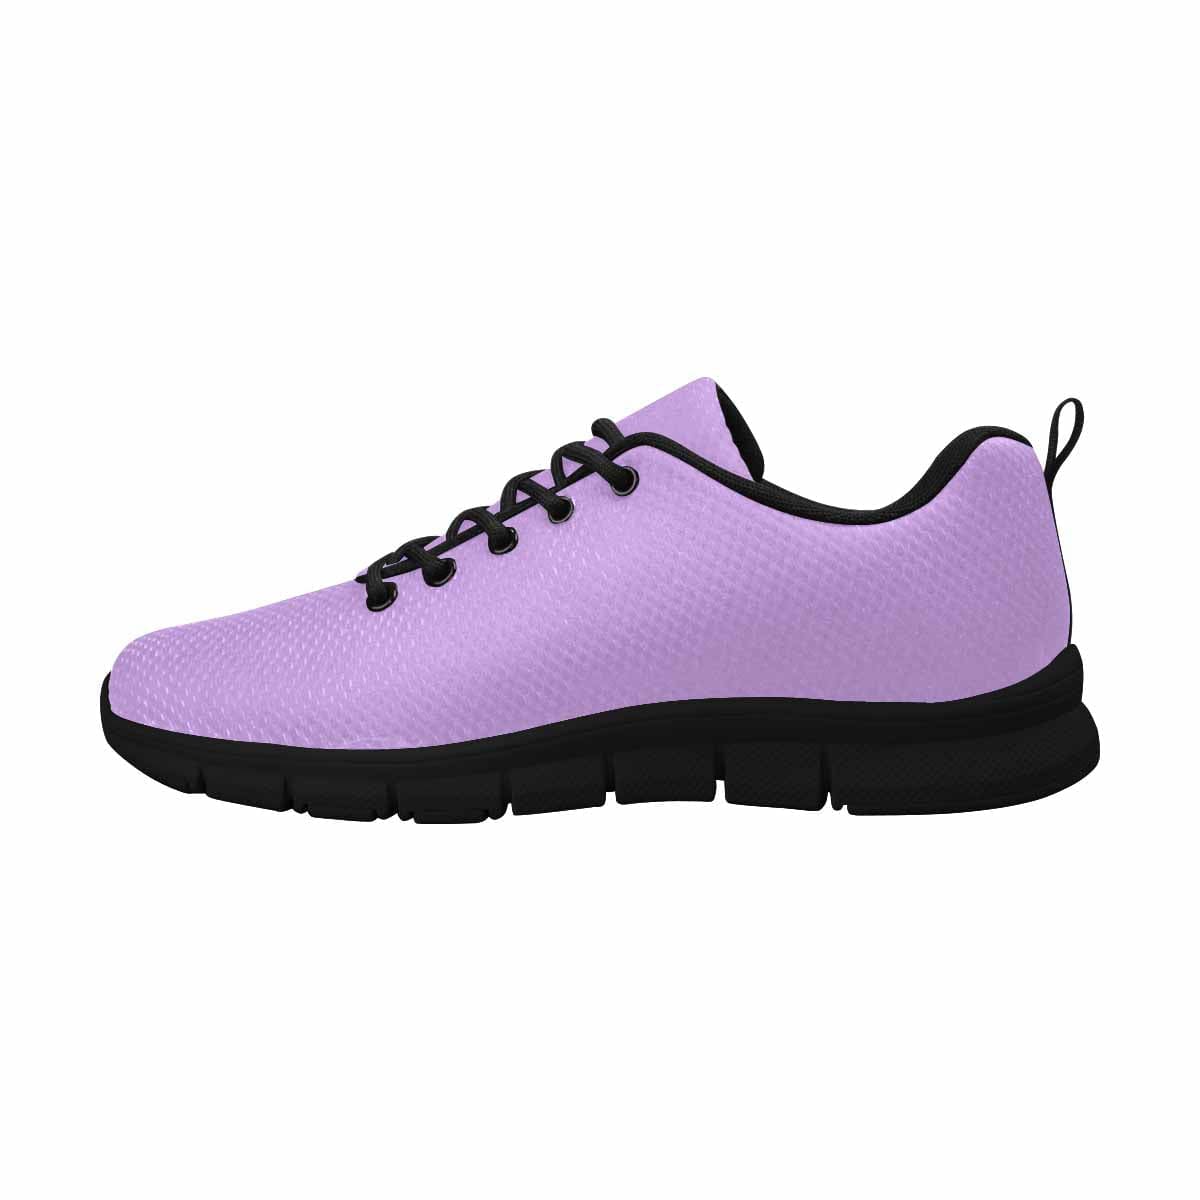 Sneakers For Men Mauve Purple - Canvas Mesh Athletic Running Shoes - Mens